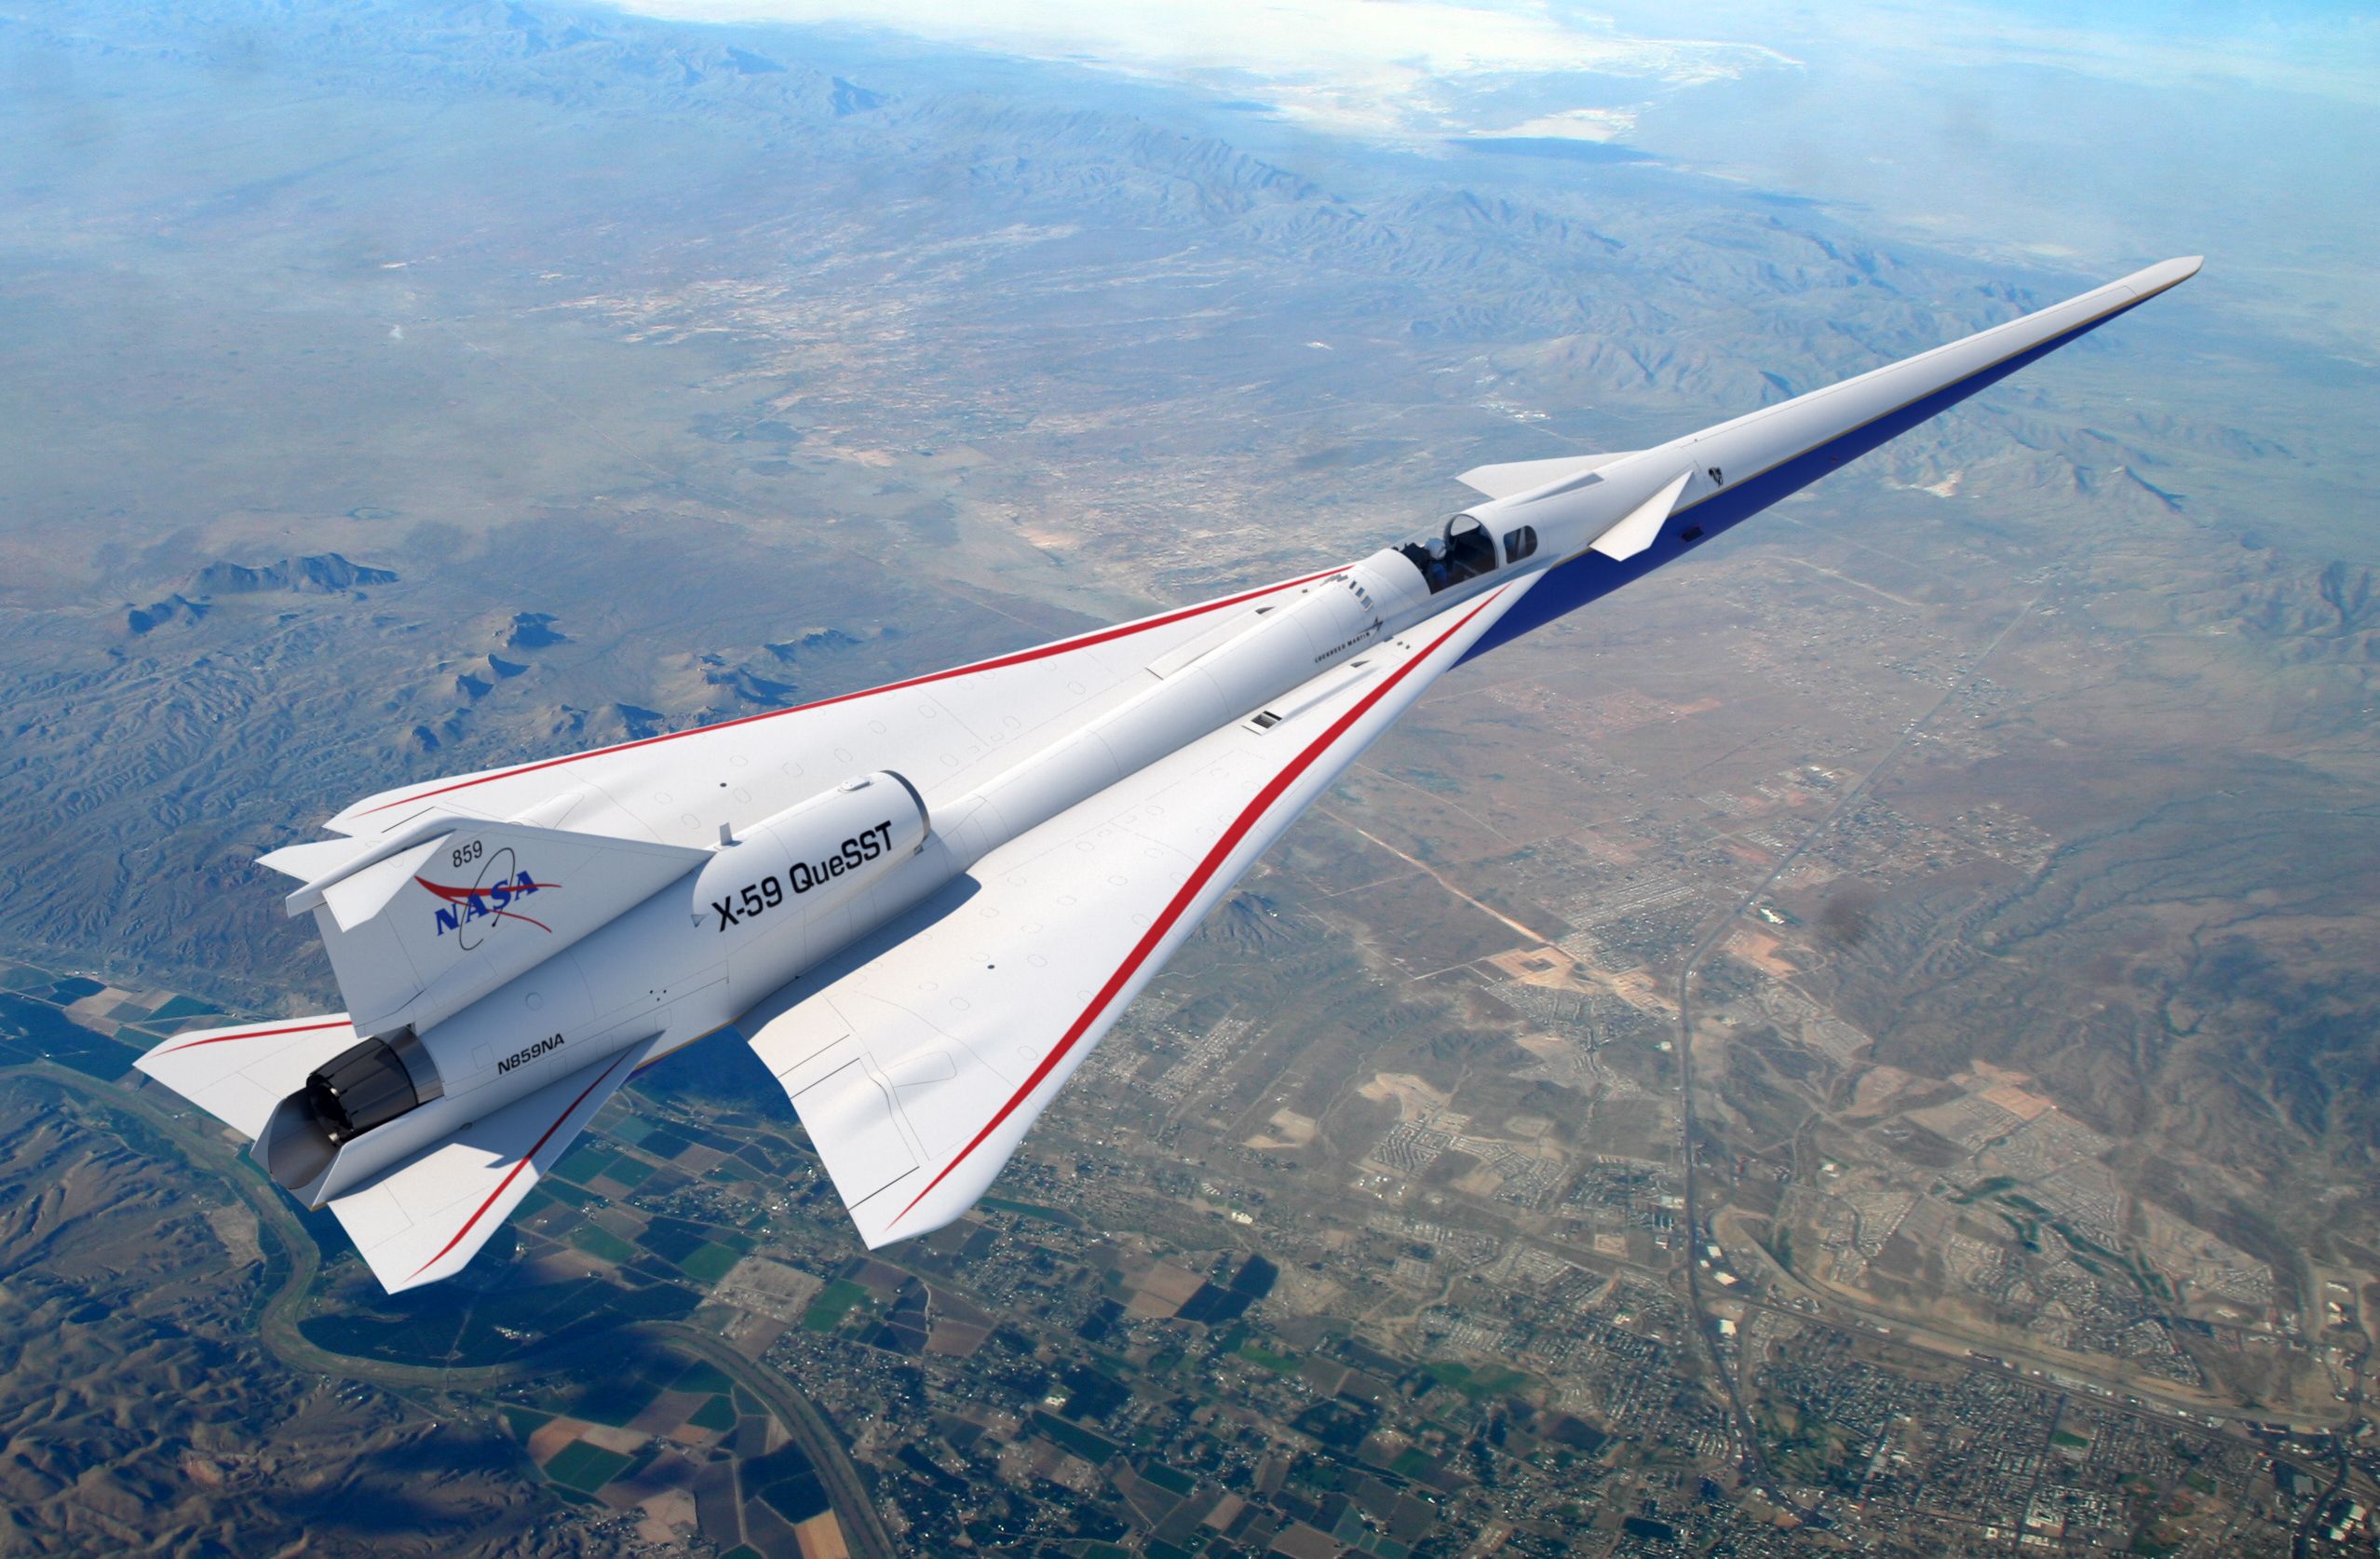 NASA: New 'quiet' jet can revive commercial supersonic travel